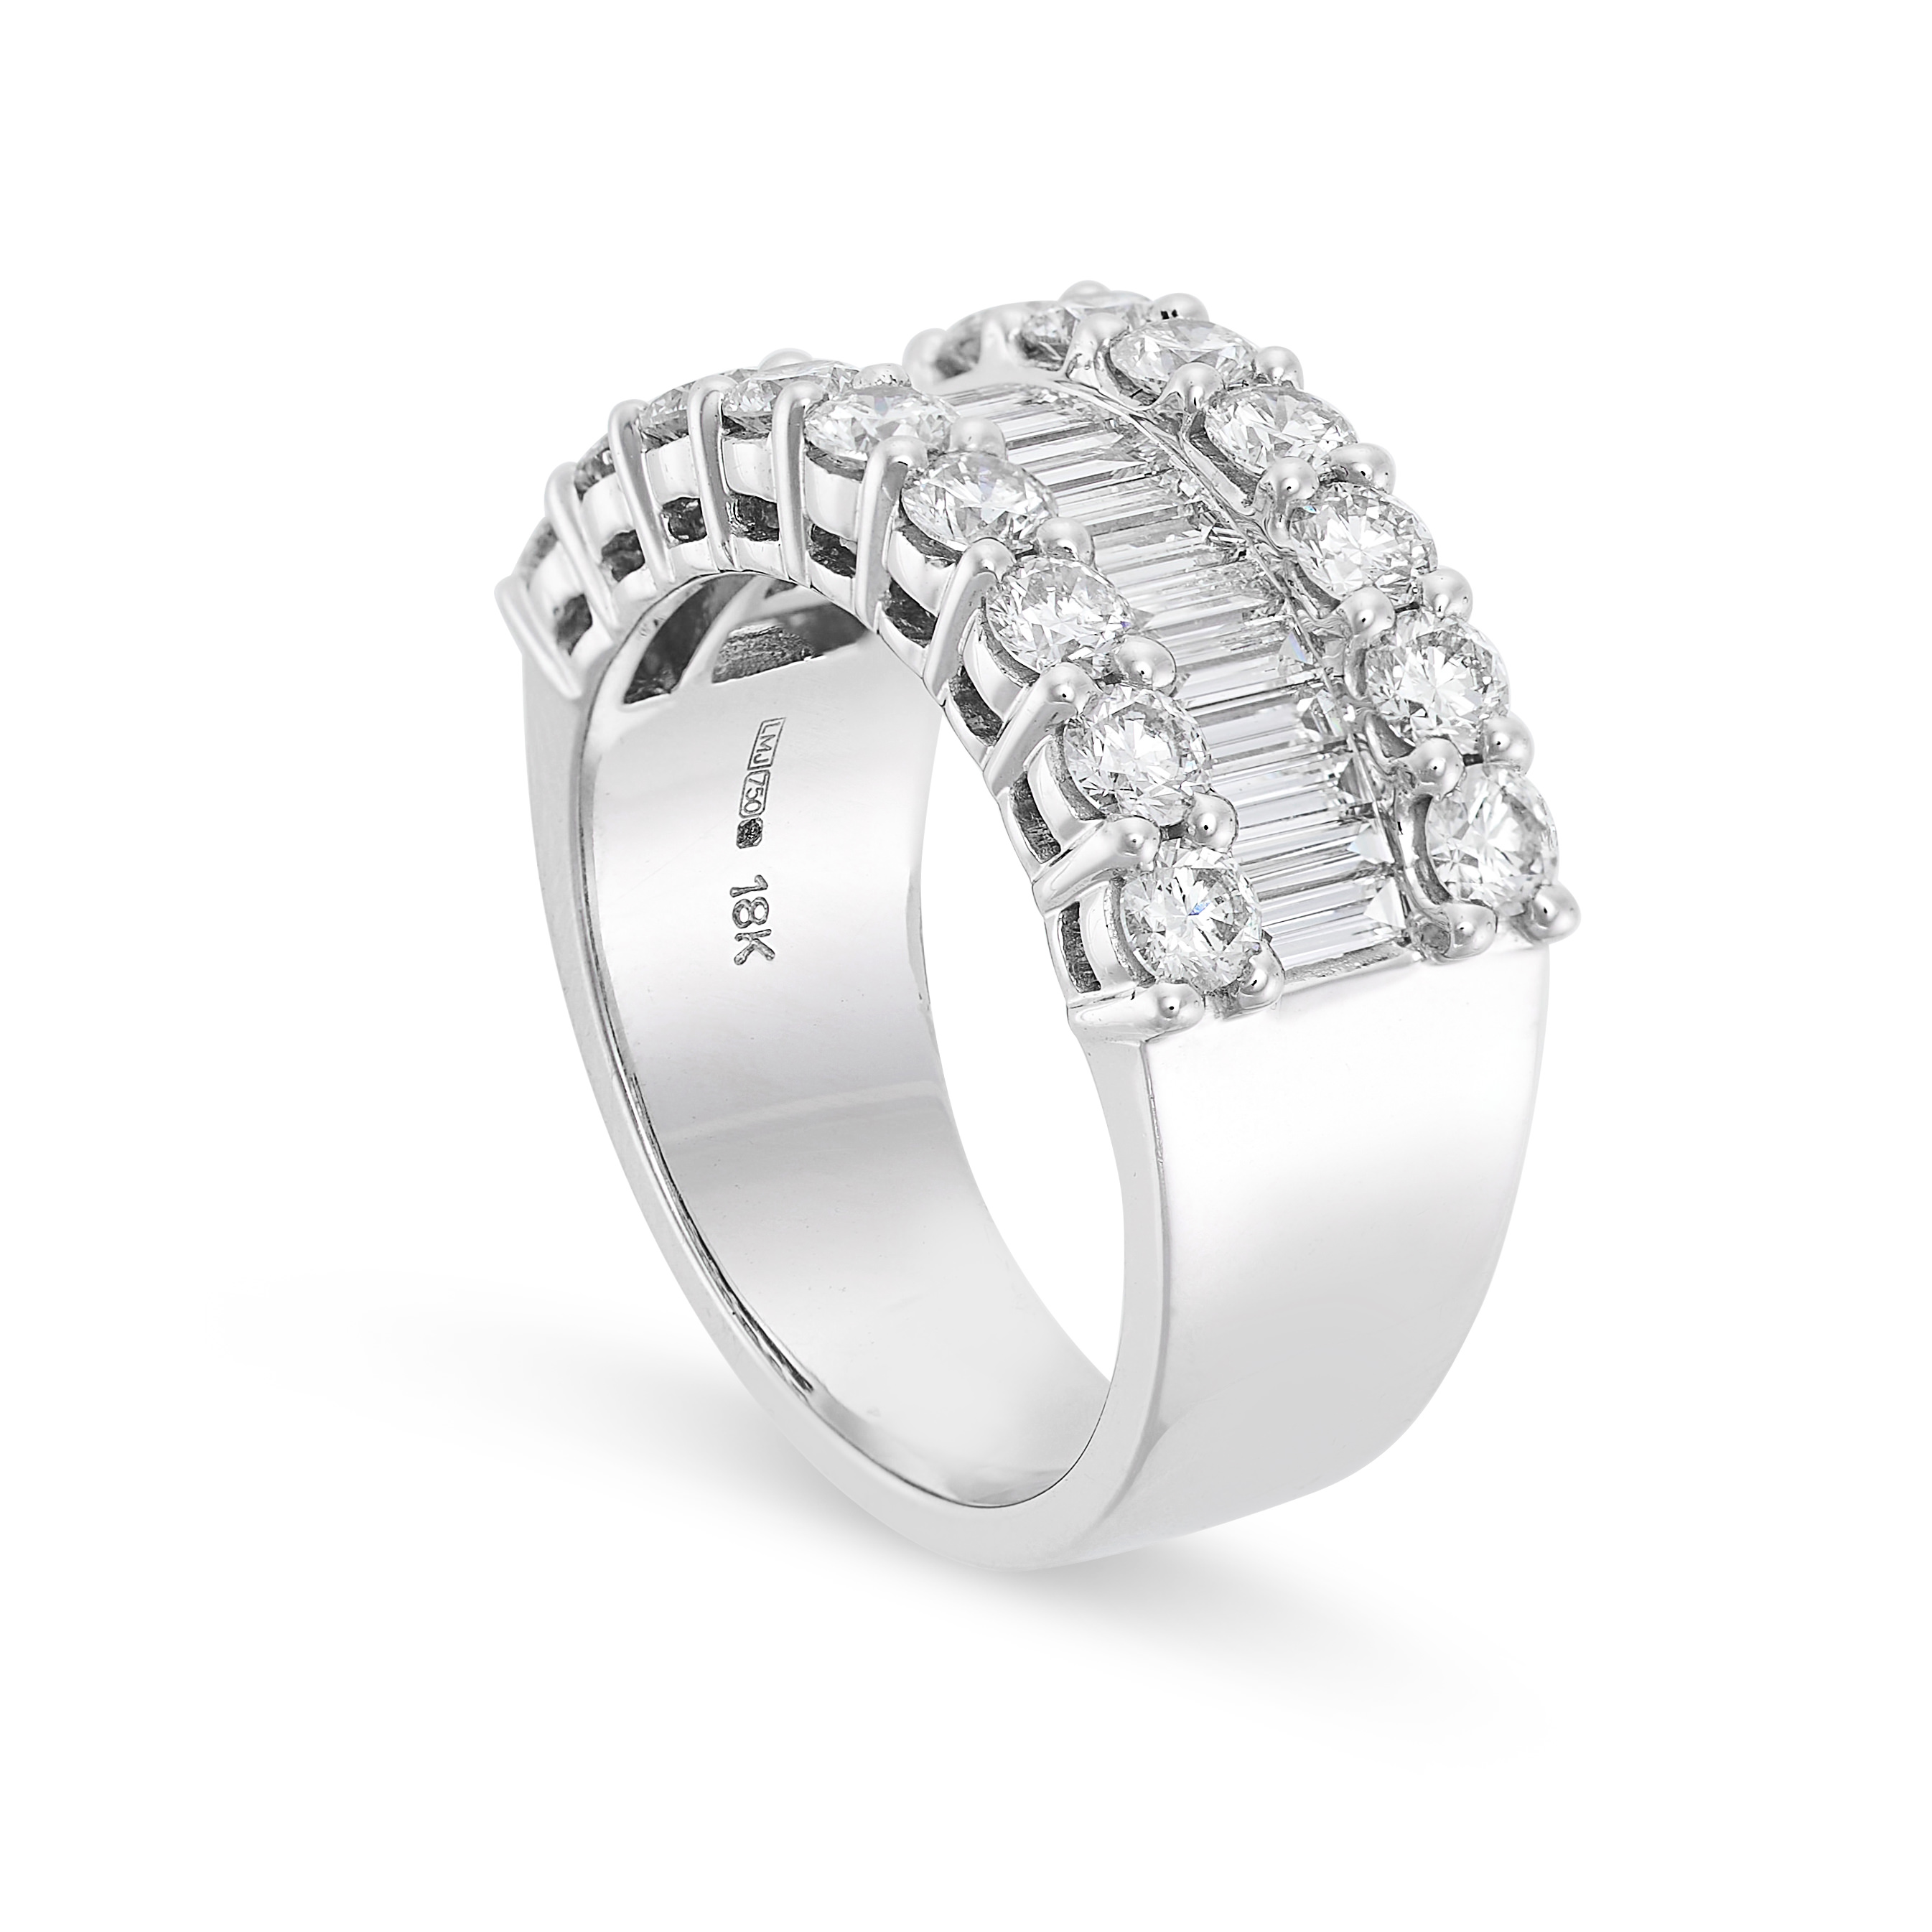 A DIAMOND BAND RING in 18ct white gold, set with a central panel of step cut diamonds between two - Image 2 of 2